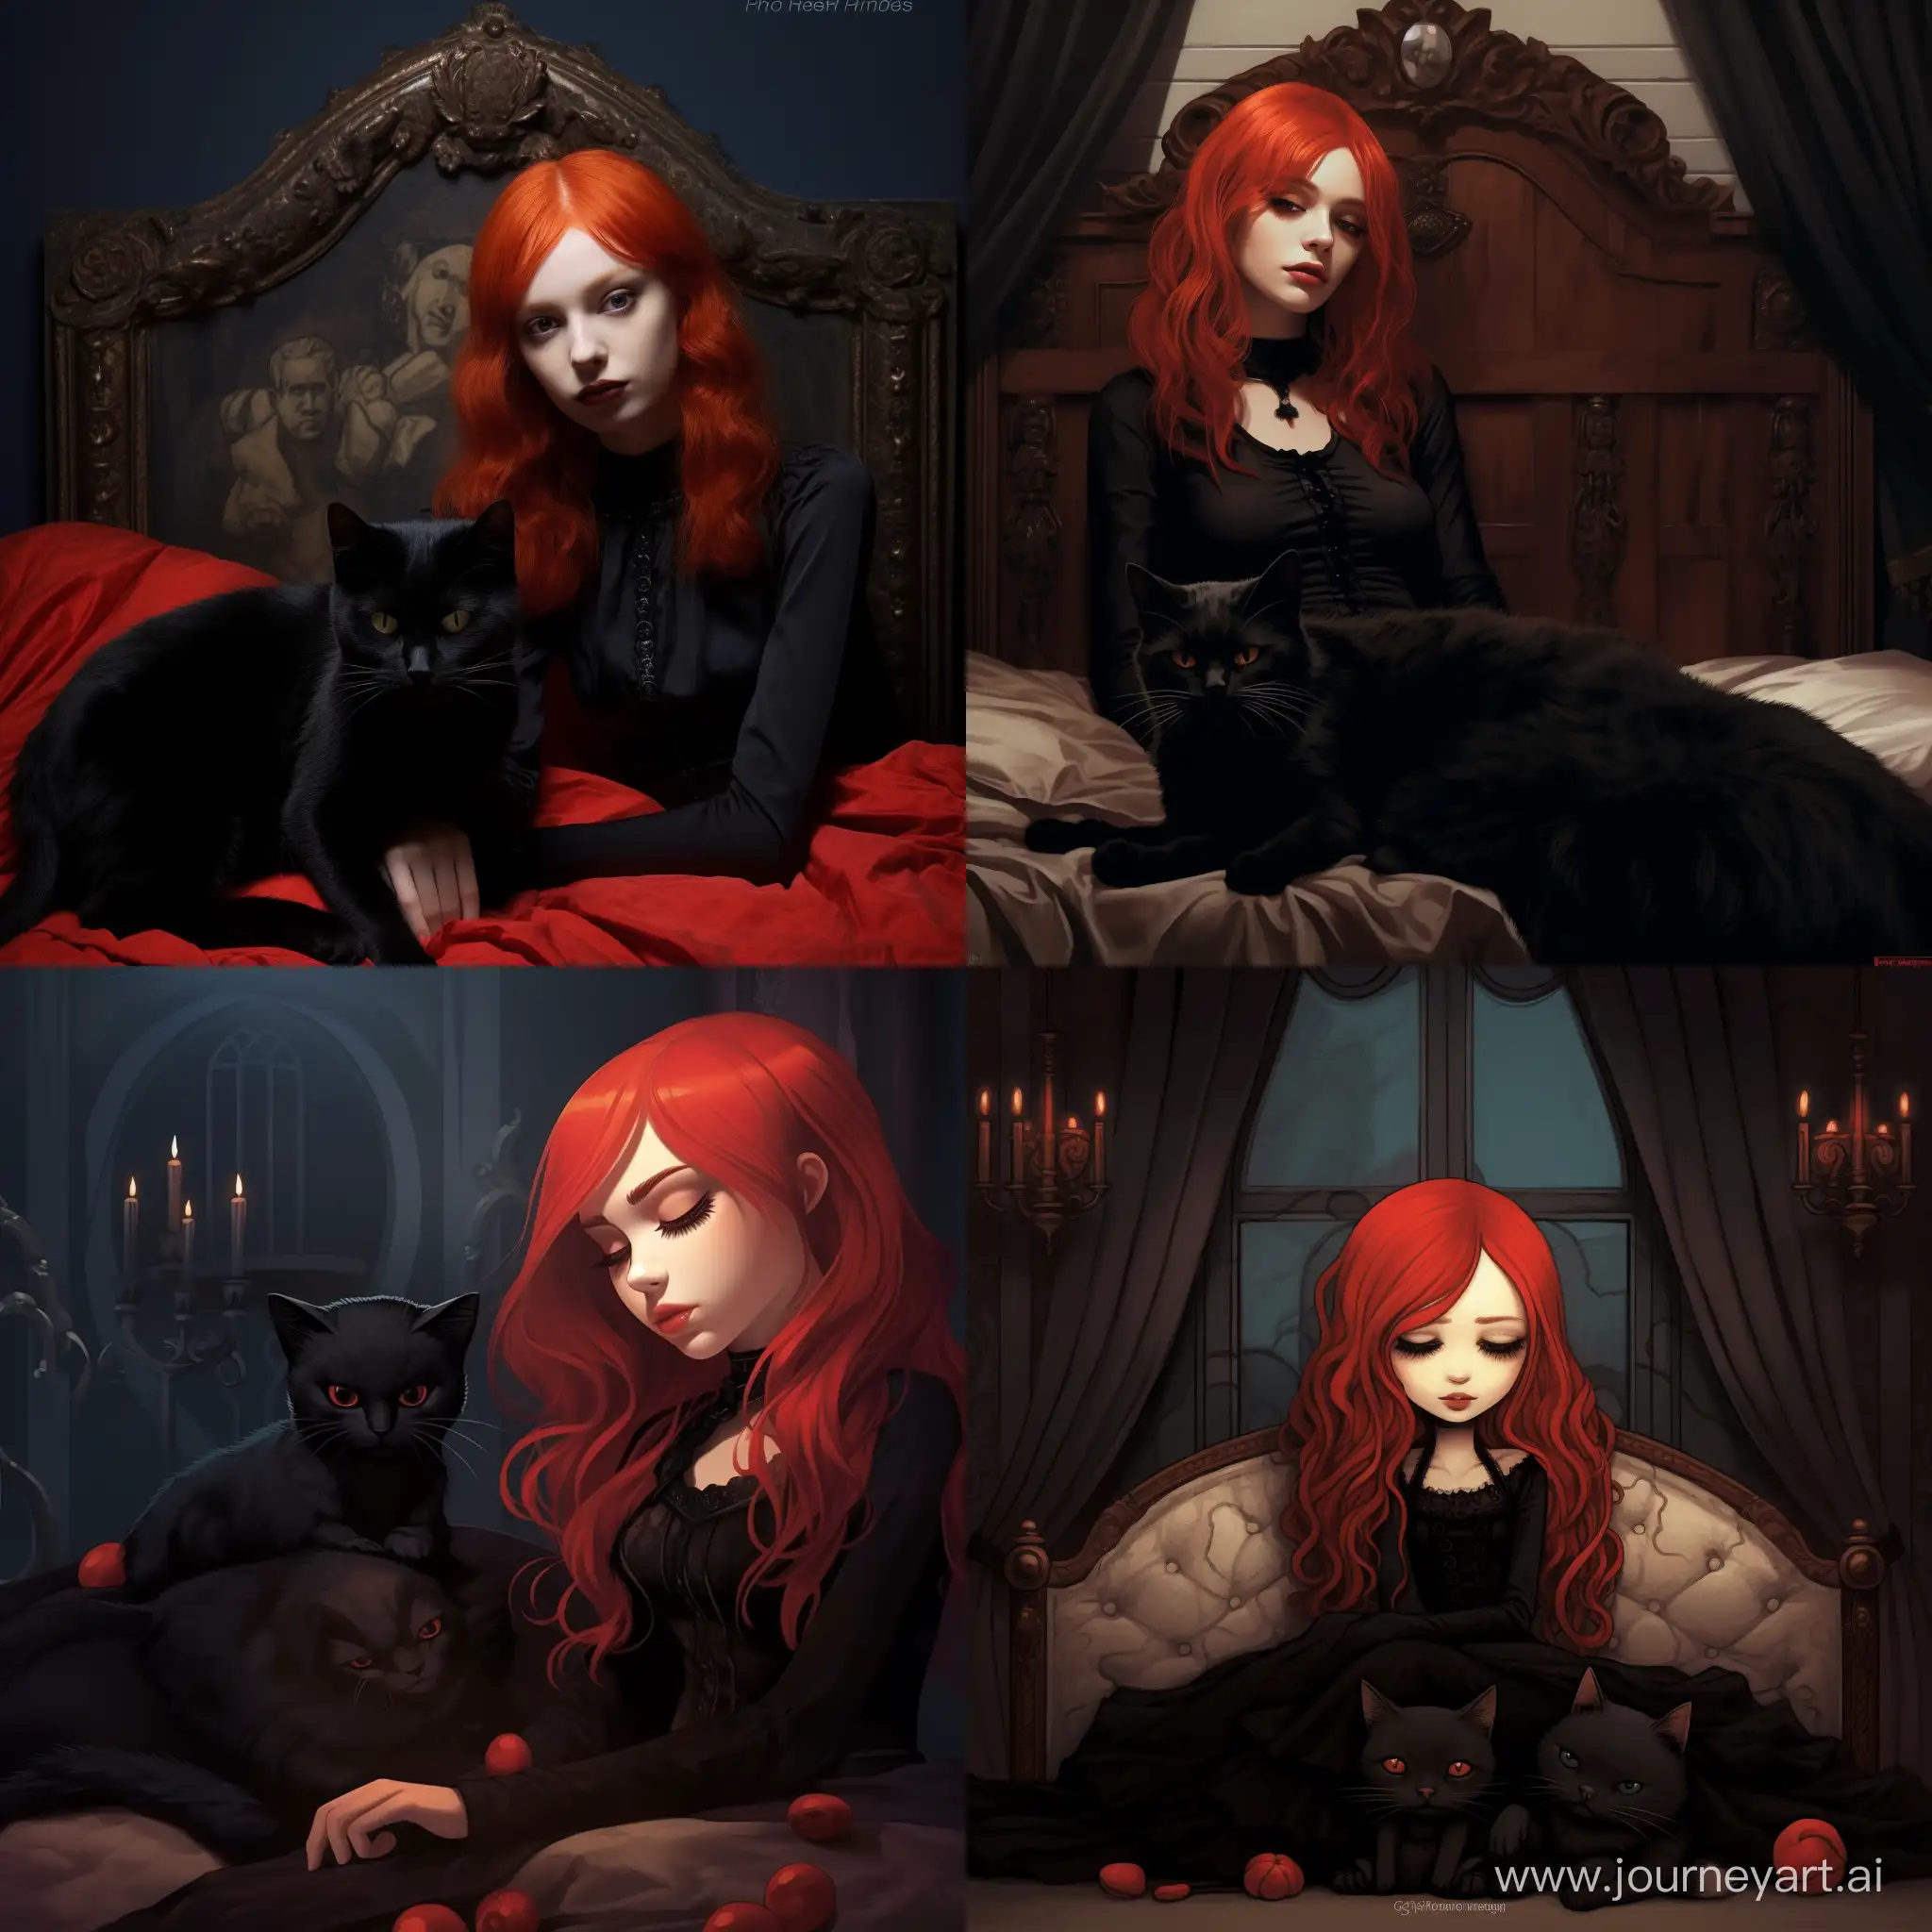 Enchanting-Slumber-RedHaired-Gothic-Girl-Rests-Beside-Mysterious-Gothic-Cat